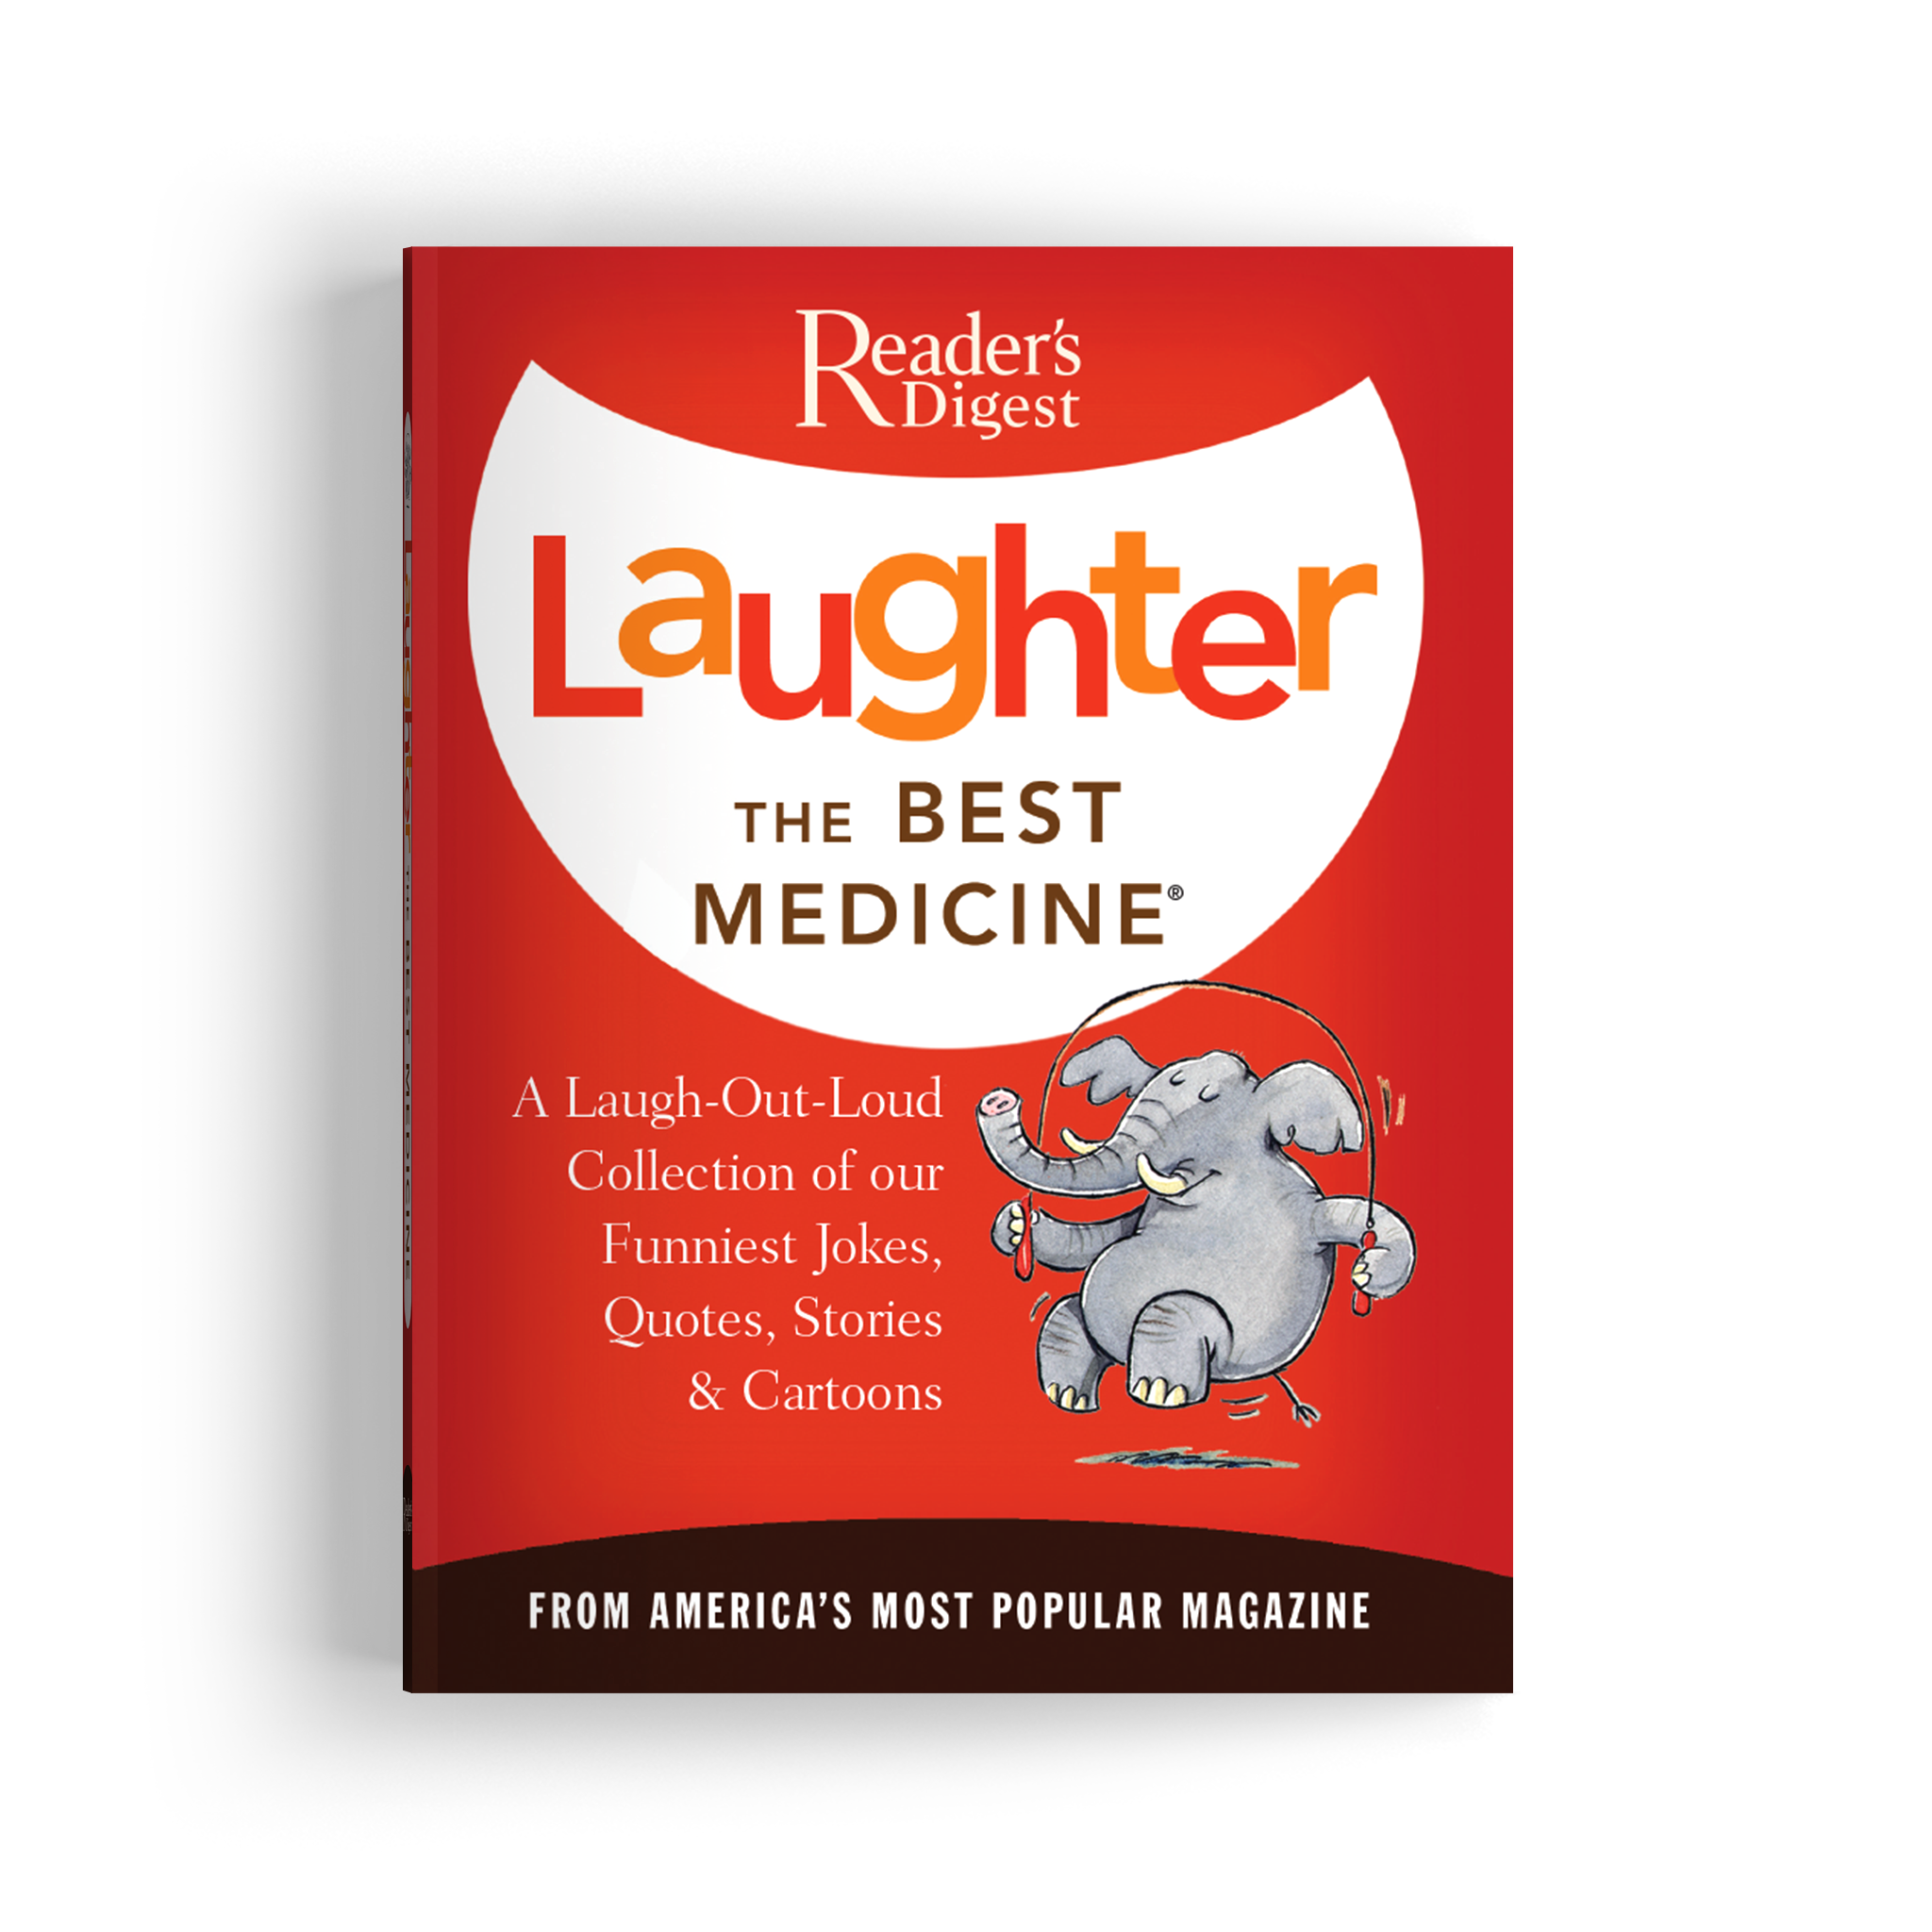 Laughter, The Best Medicine